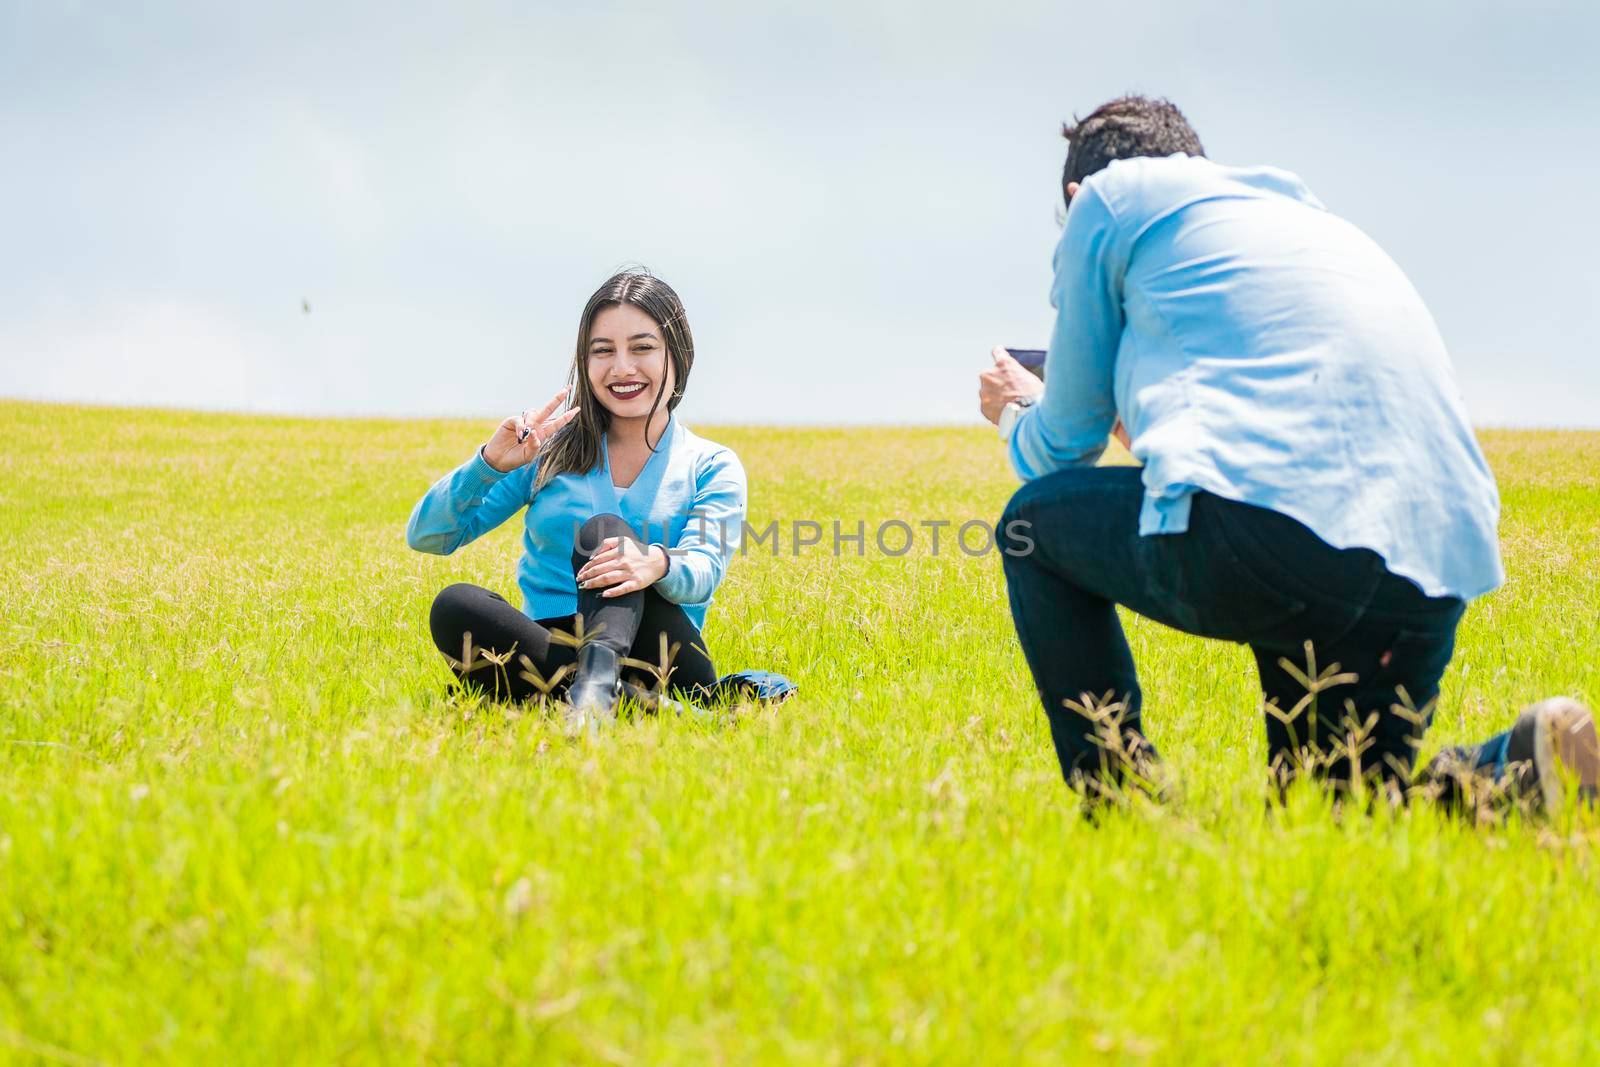 Two friends taking photos with the cell phone in the field, A guy taking a picture of a girl in the field, Boyfriend taking a picture of his girlfriend in the field by isaiphoto